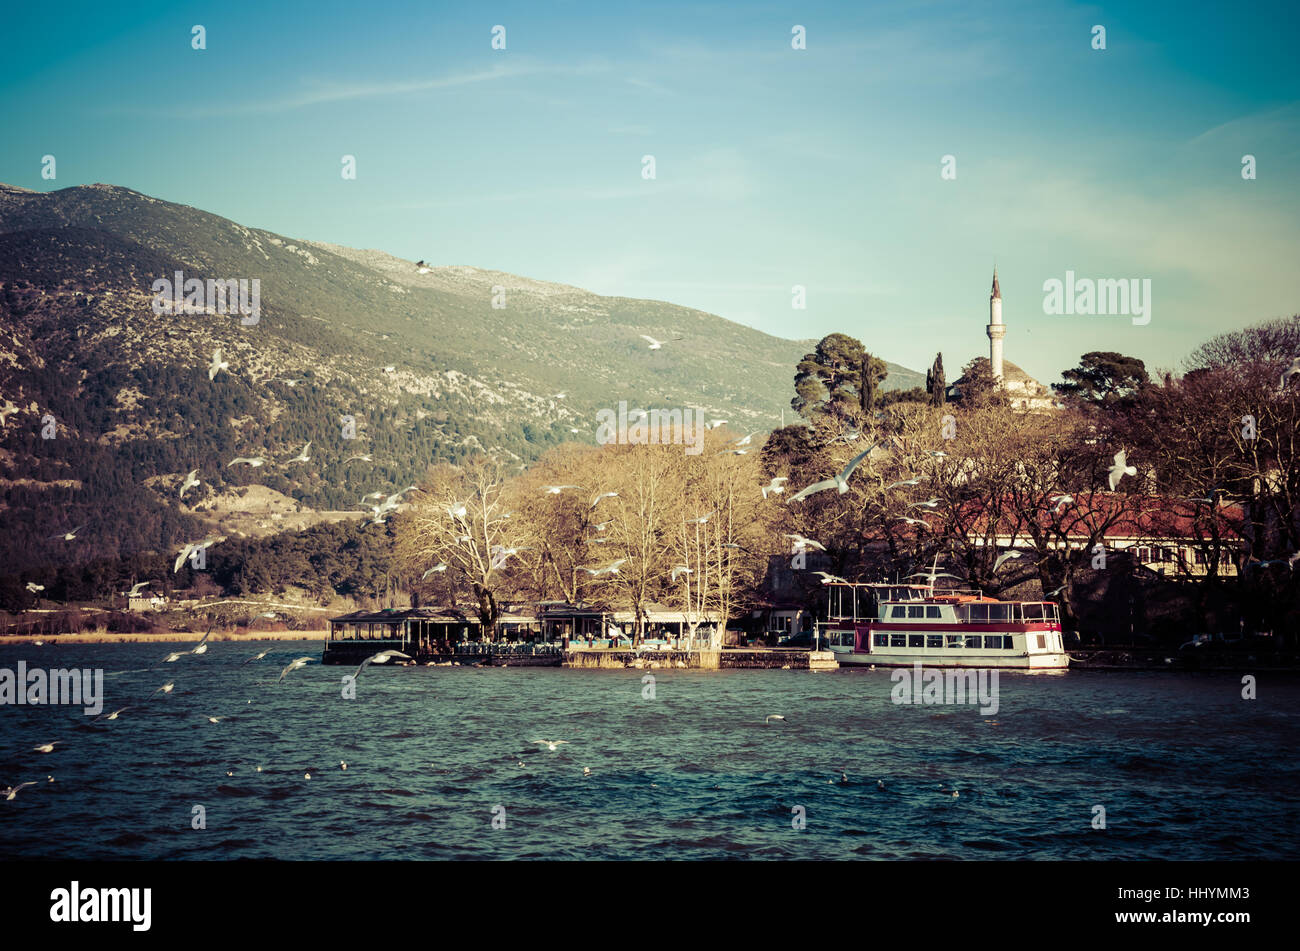 Ioannina city in Greece. View of the lake and the mosque of Aslan Pasa cami with seagulls and swans. Stock Photo